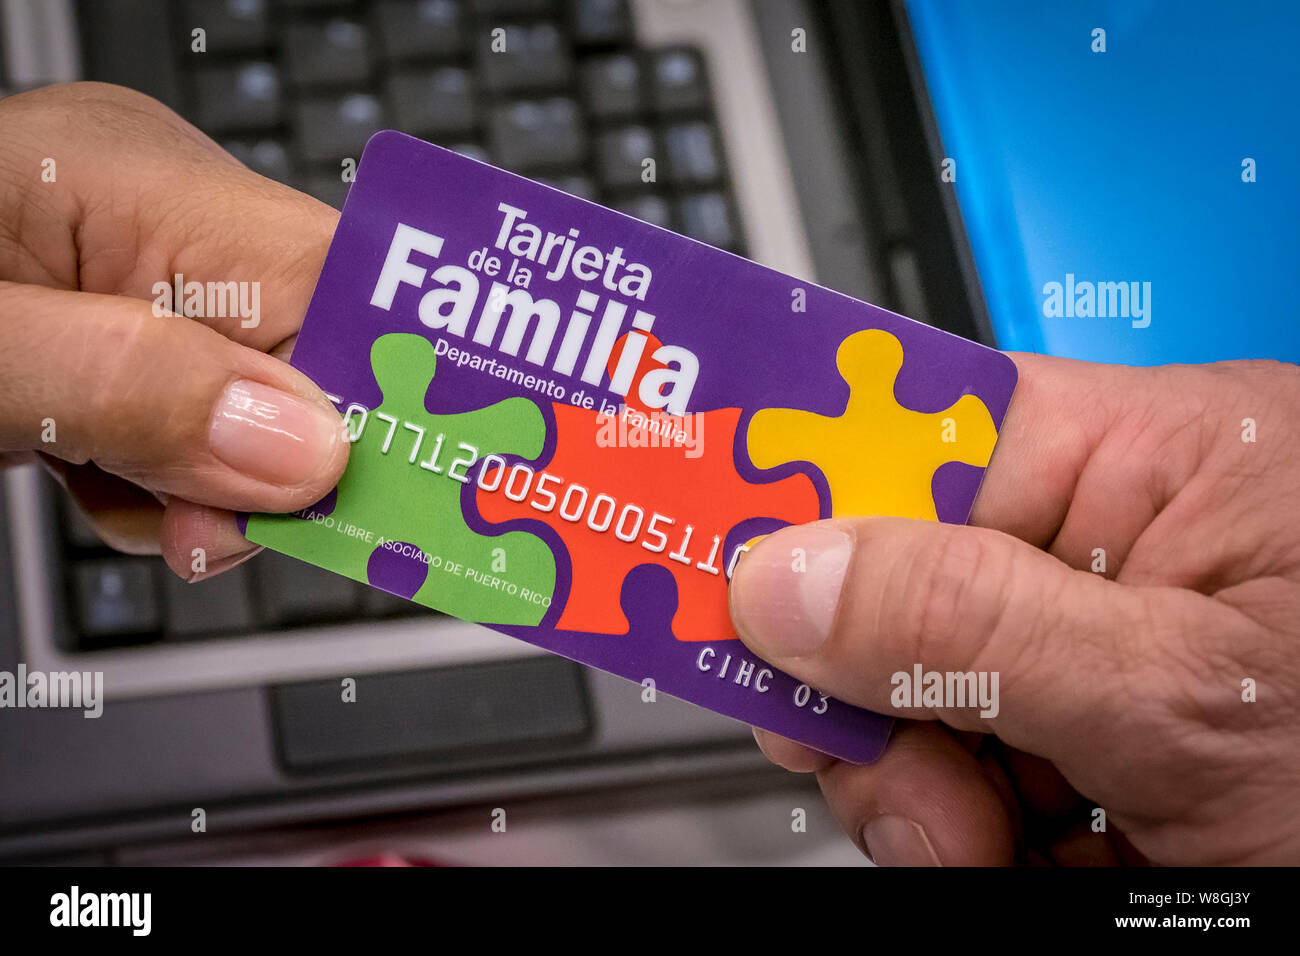 A resident in Puerto Rico receives a benefit card to help them recover after Hurricane Maria on March 22, 2018 Stock Photo